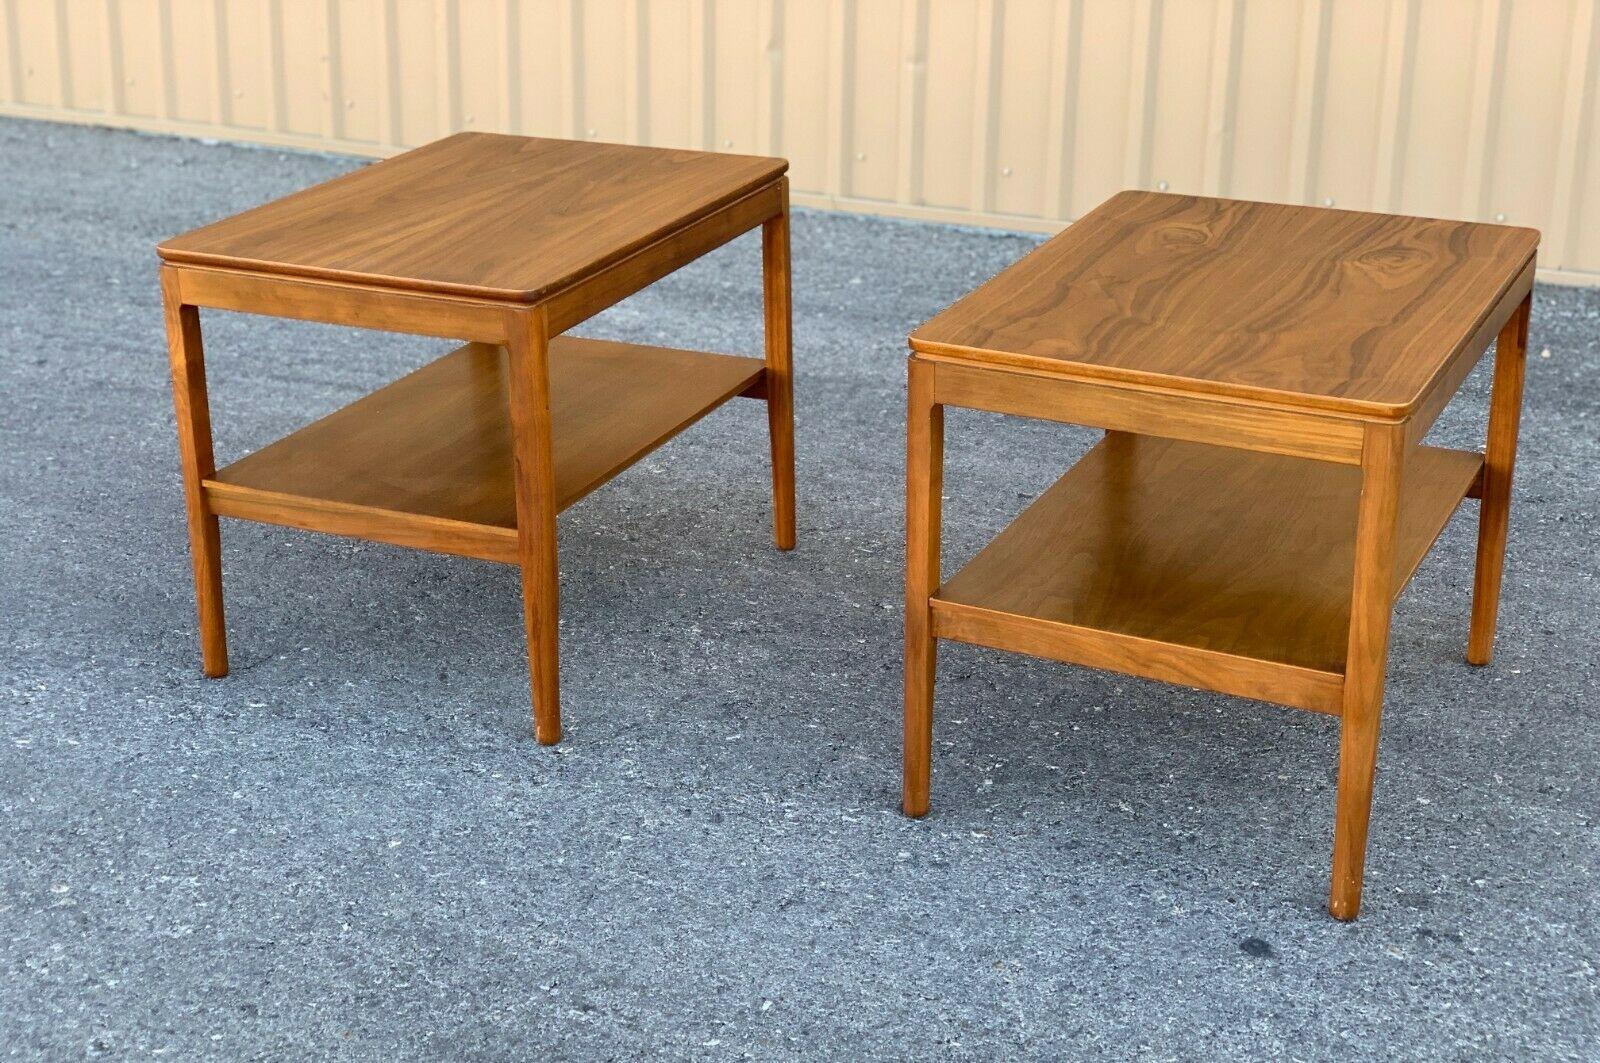 Beautiful walnut side tables with solid construction designed by Kipp Stewart for Drexel from their Declaration collection, a simple design with rounded edges and fine wood gaining. Year manufacture 1958
Very Near mint One small imperfection On one